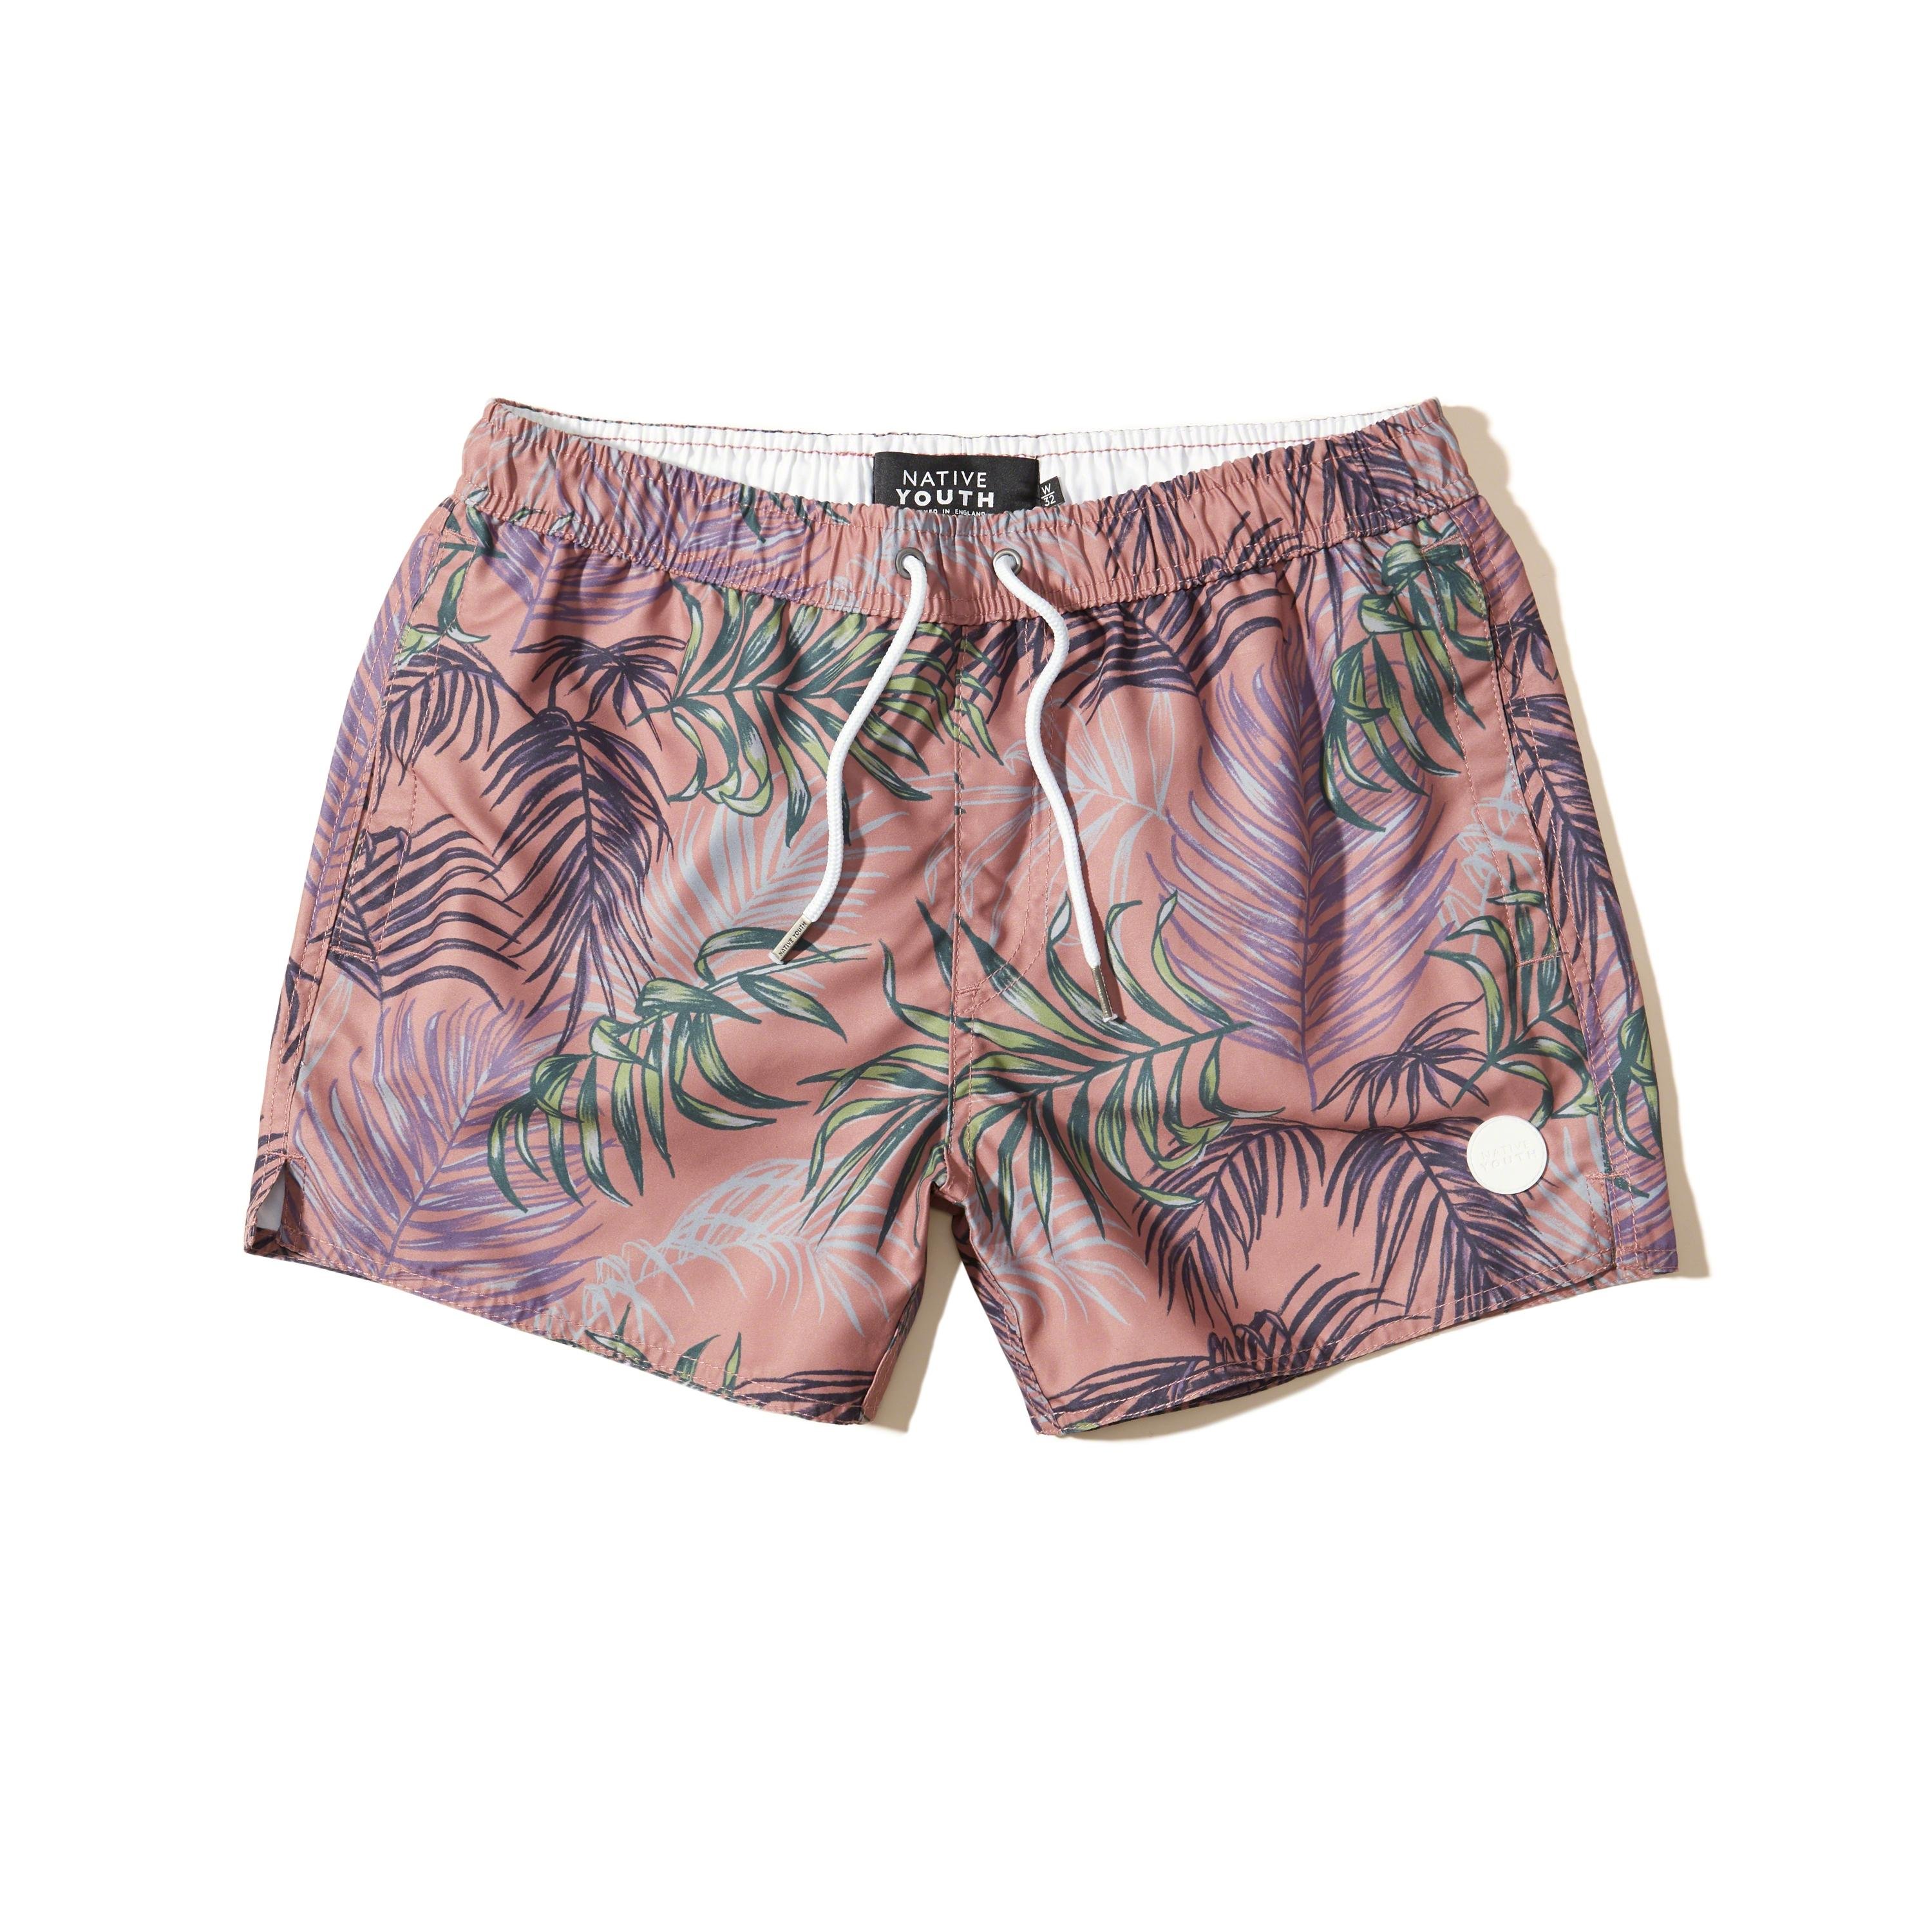 Lyst - Hollister Native Youth Swim Trunks in Pink for Men